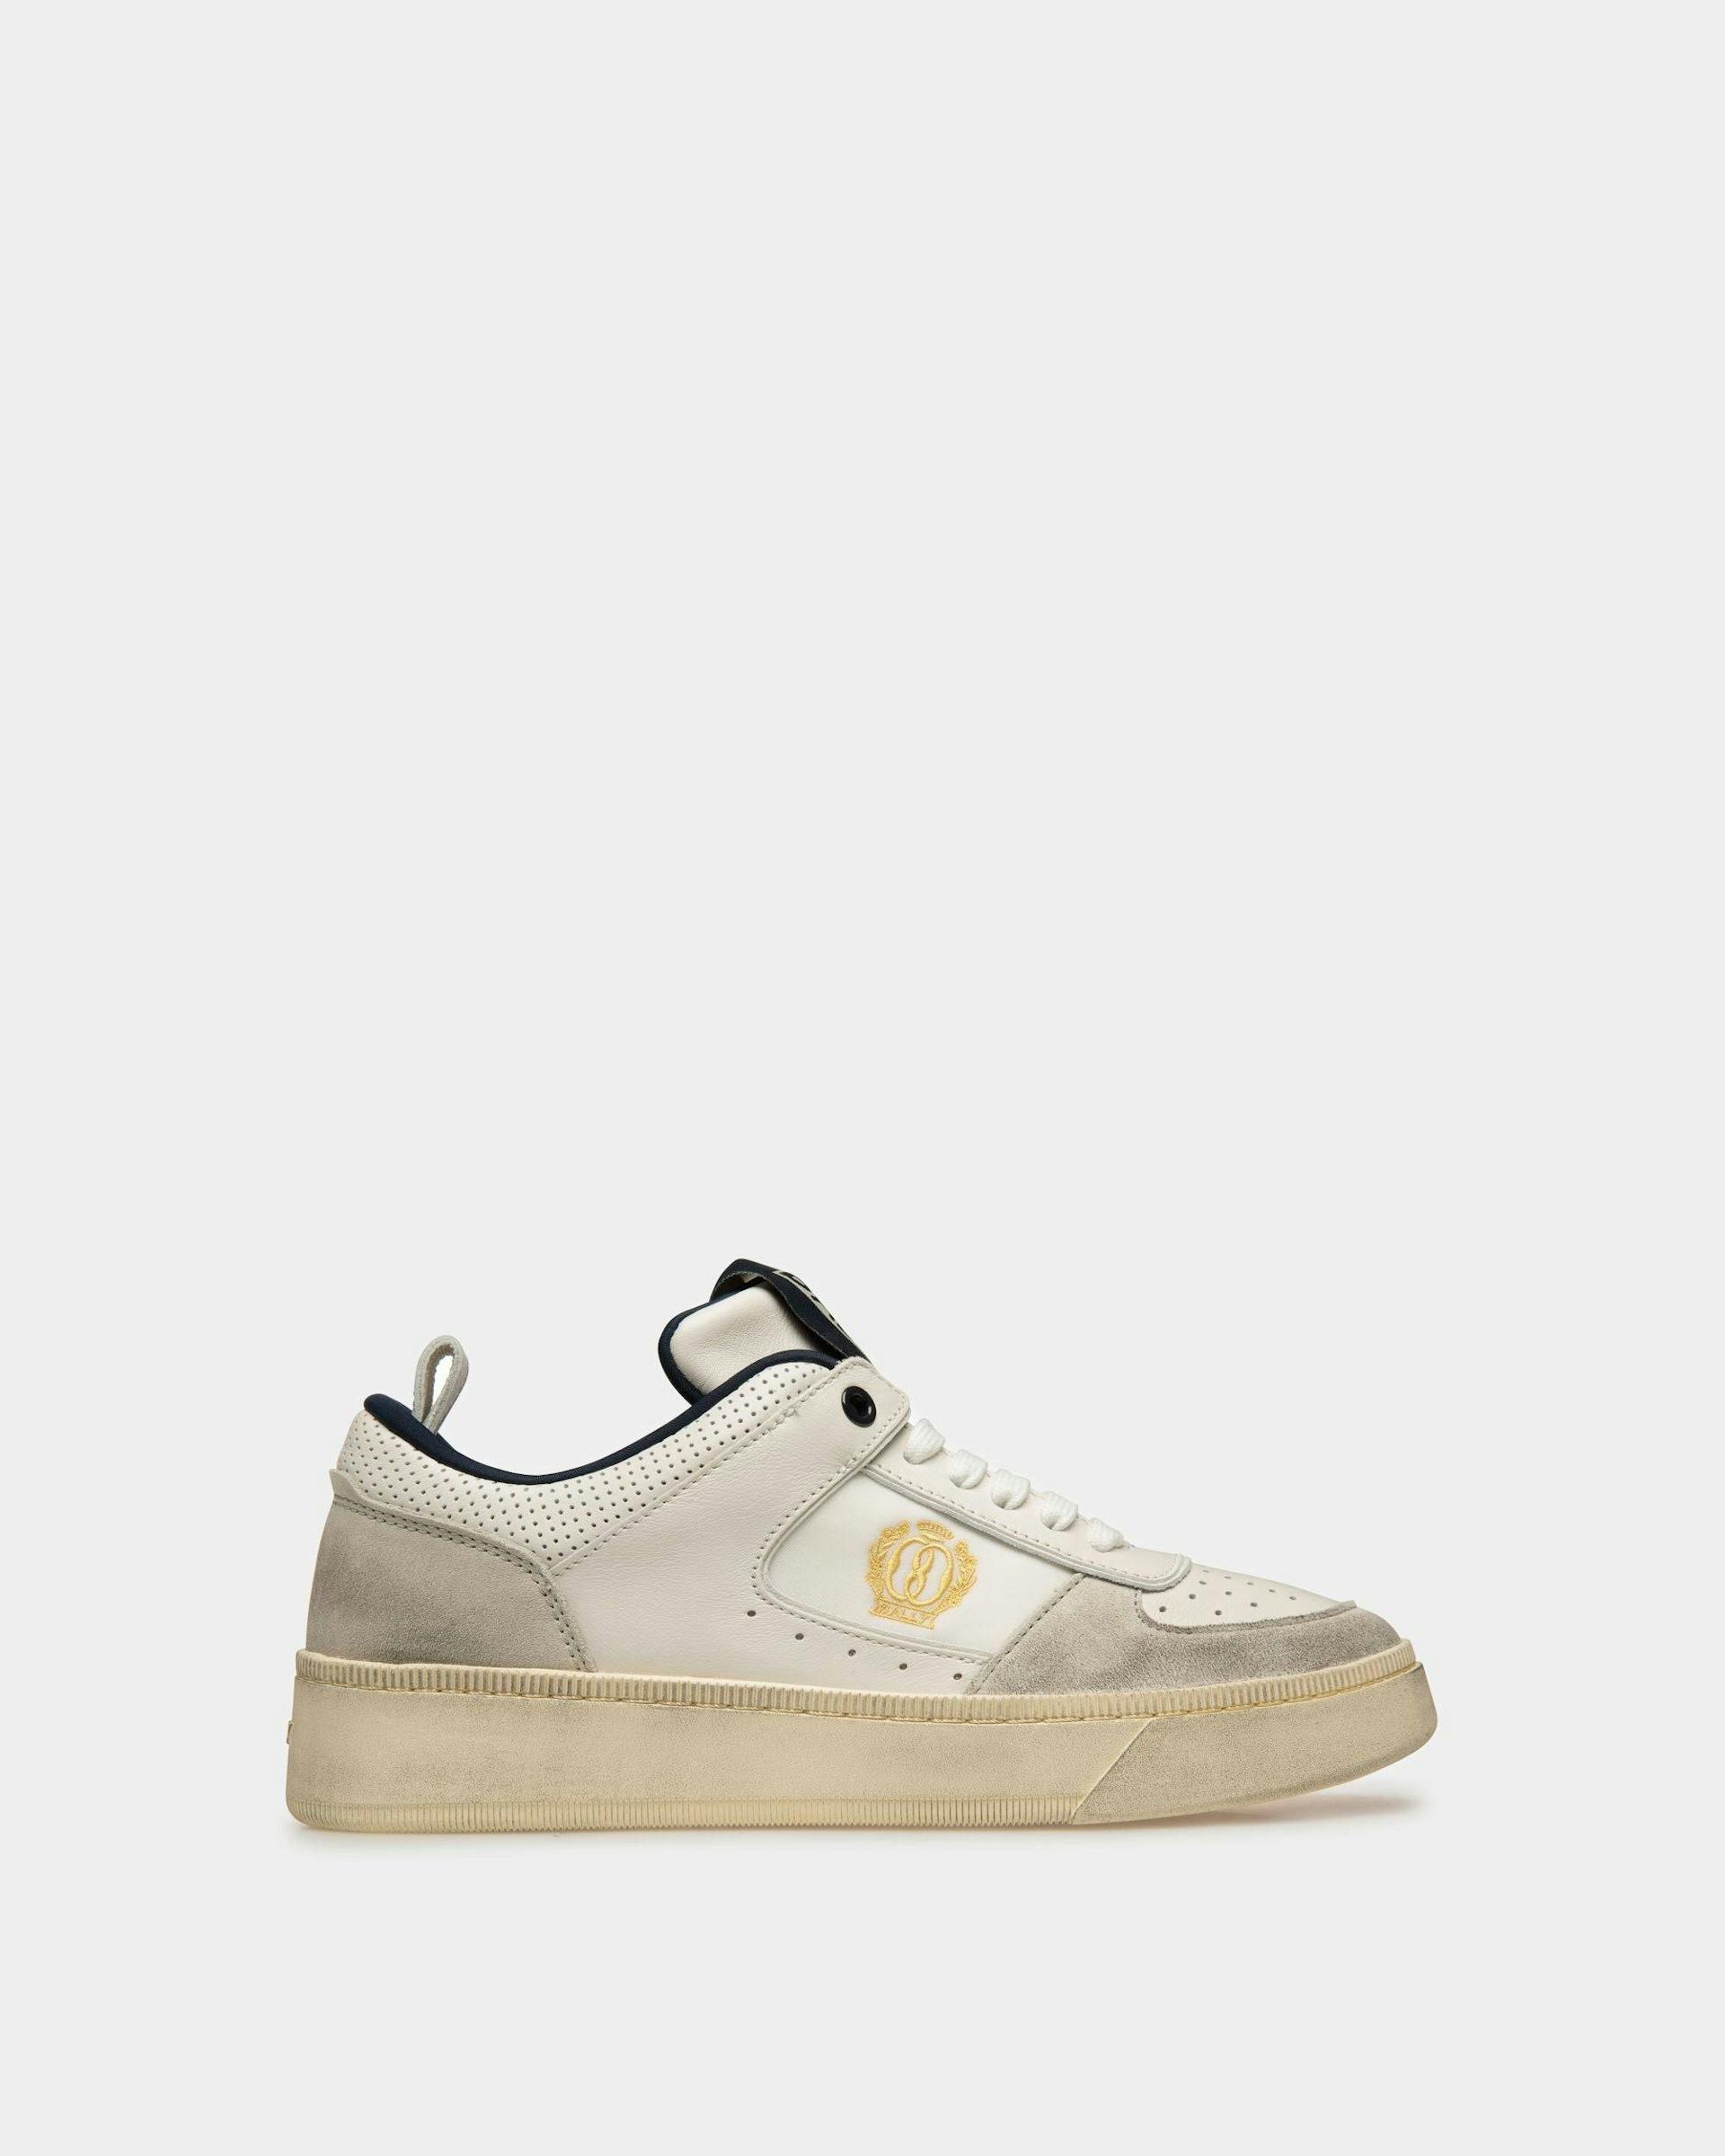 Raise Sneakers In Dusty White And Midnight Leather - Women's - Bally - 01